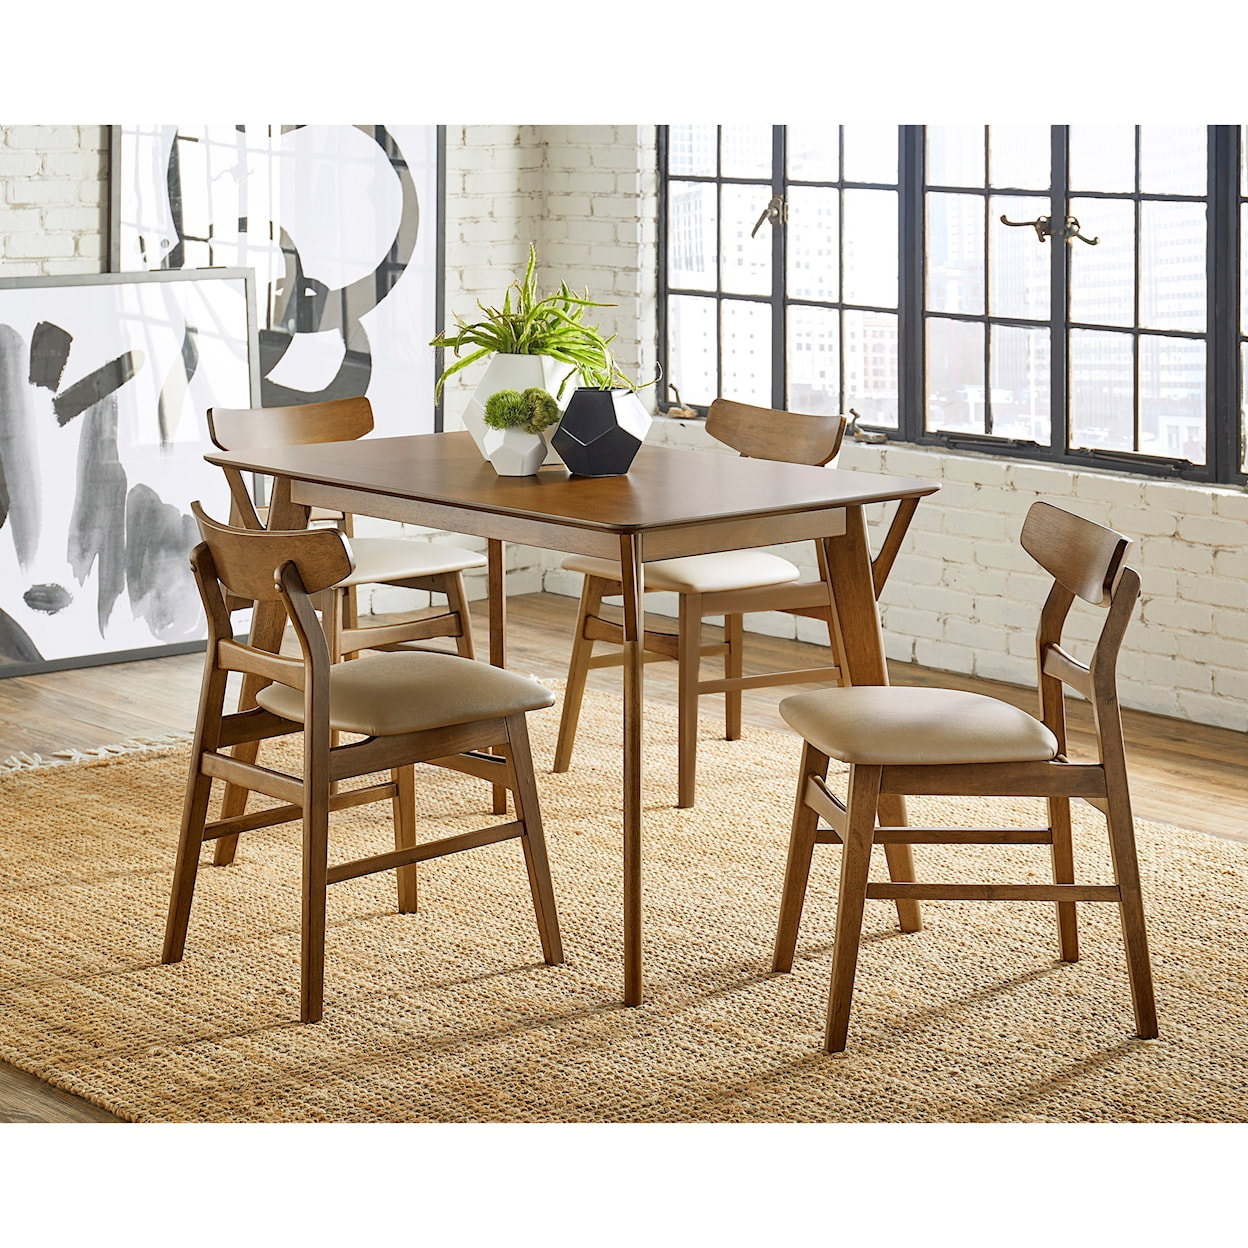 Progressive Furniture Marlow 5-Piece Table and Chair Set